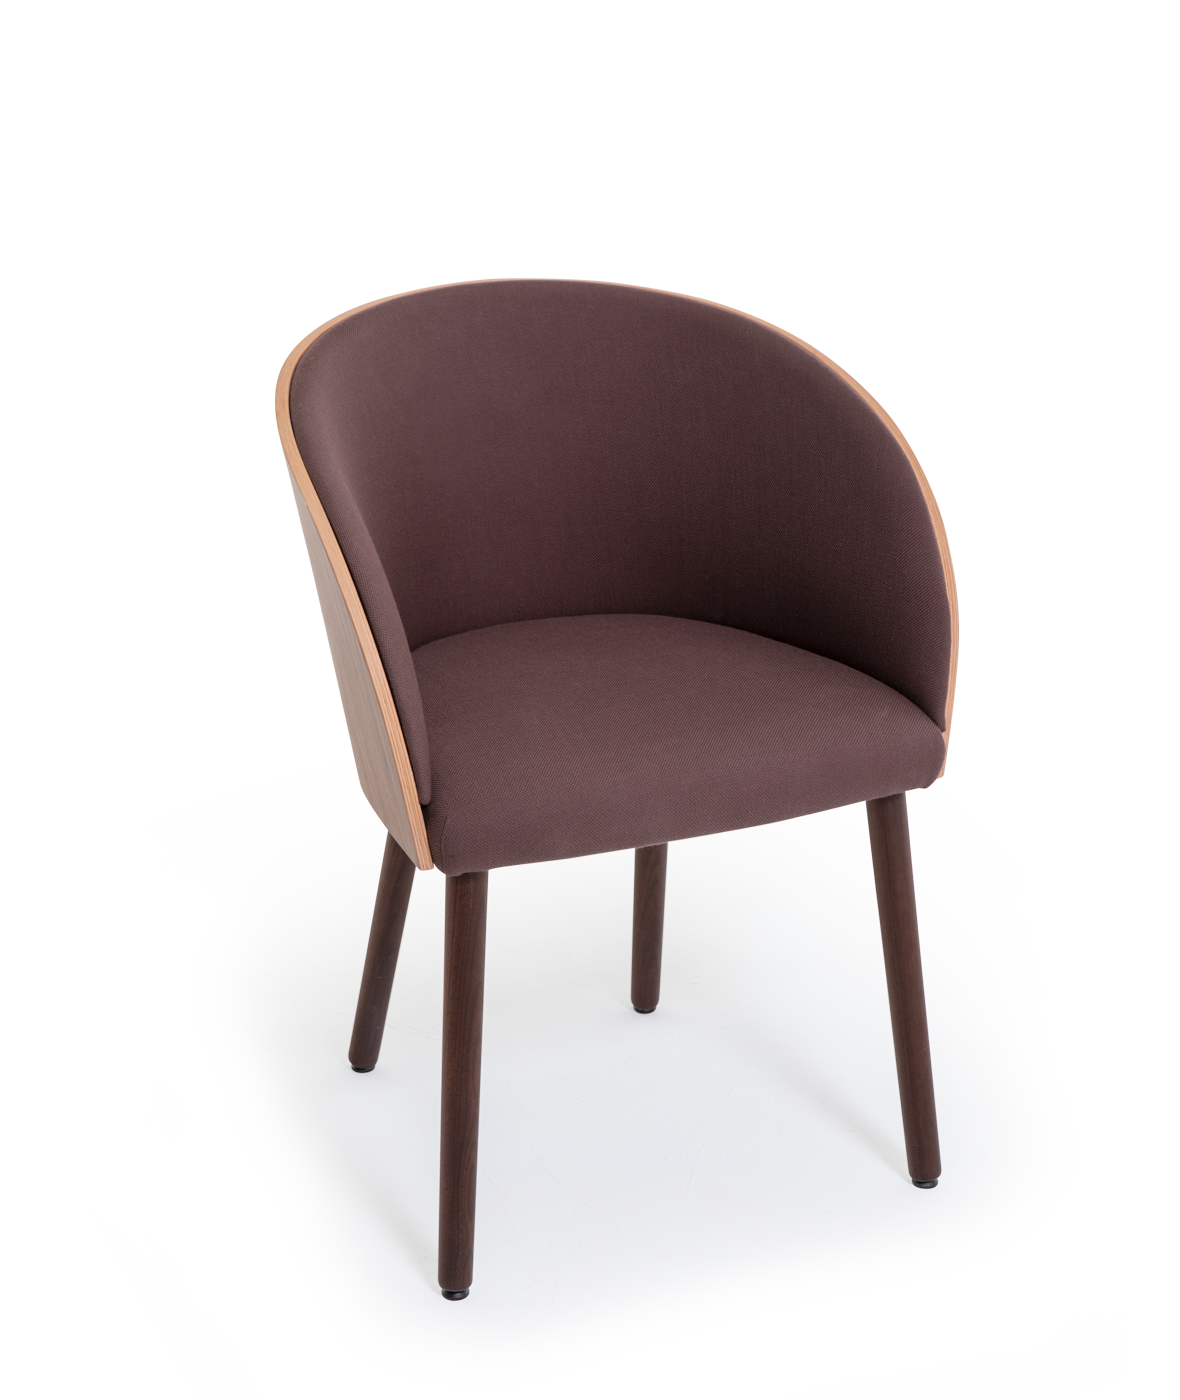 Vergés - Cistell Original chair with armrests and wooden legs